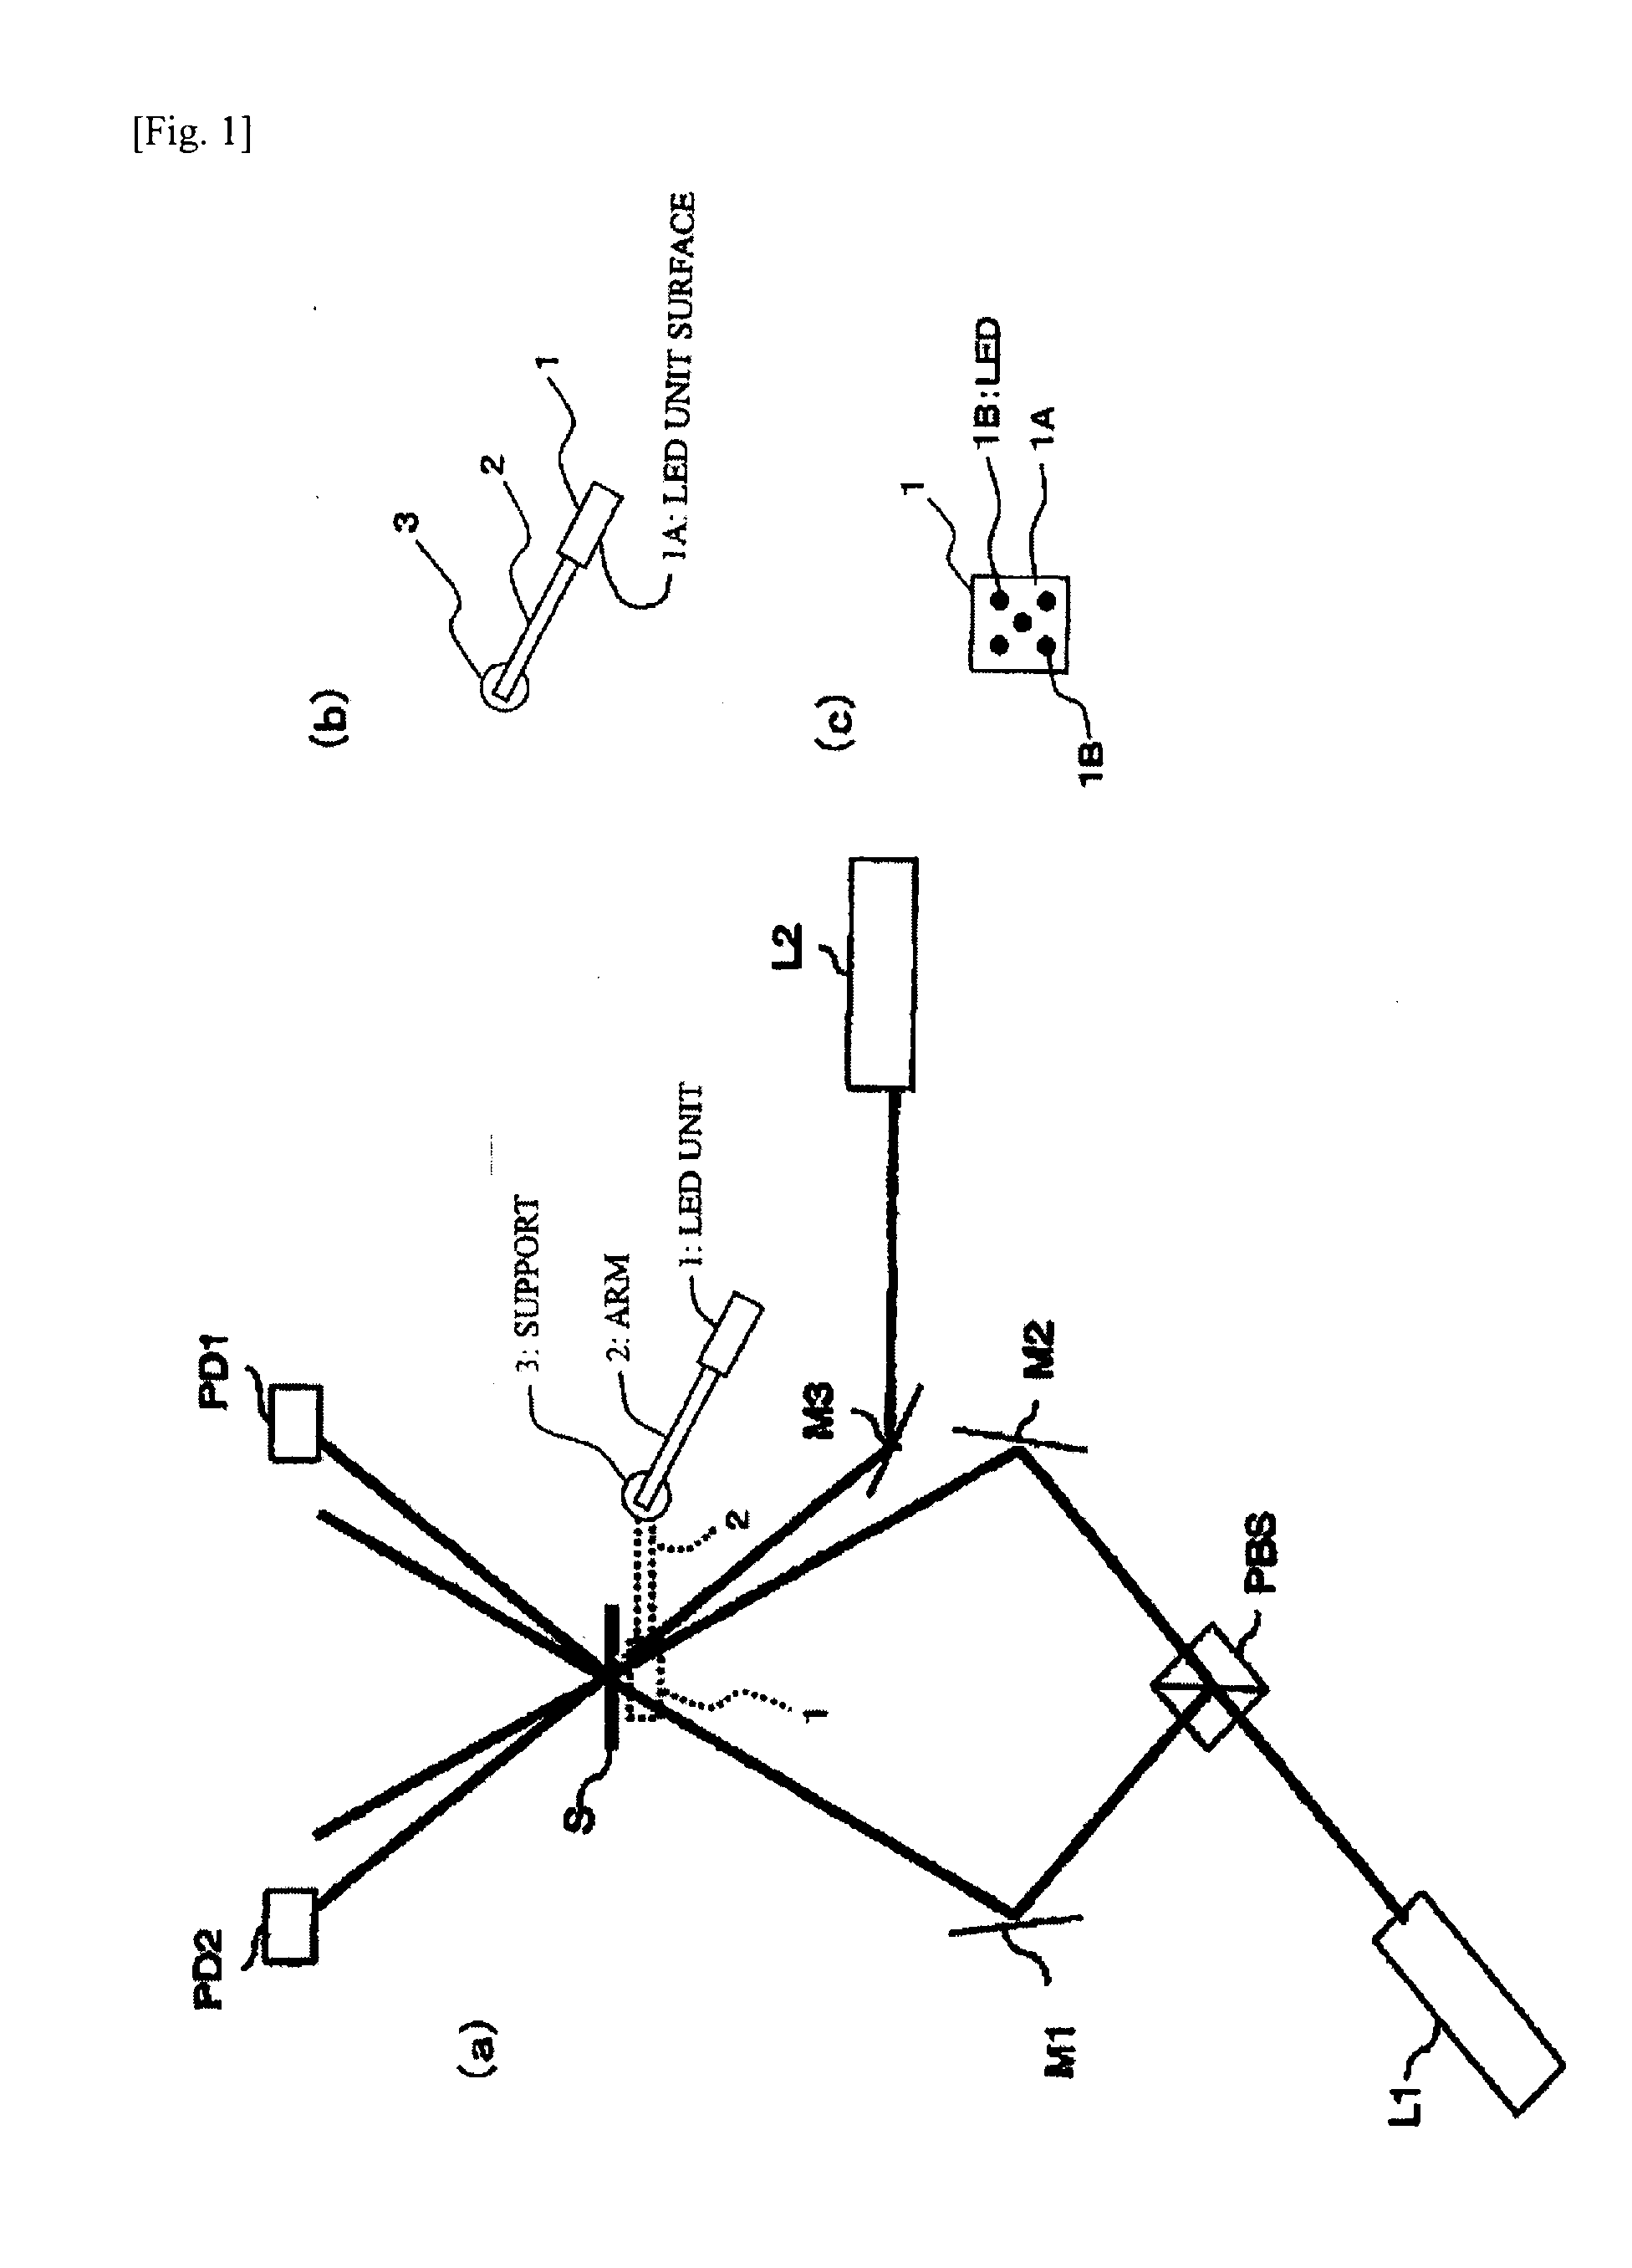 Photoreactive composition, optical material, composition for forming holographic recording layer, holographic recording material, and holographic recording medium